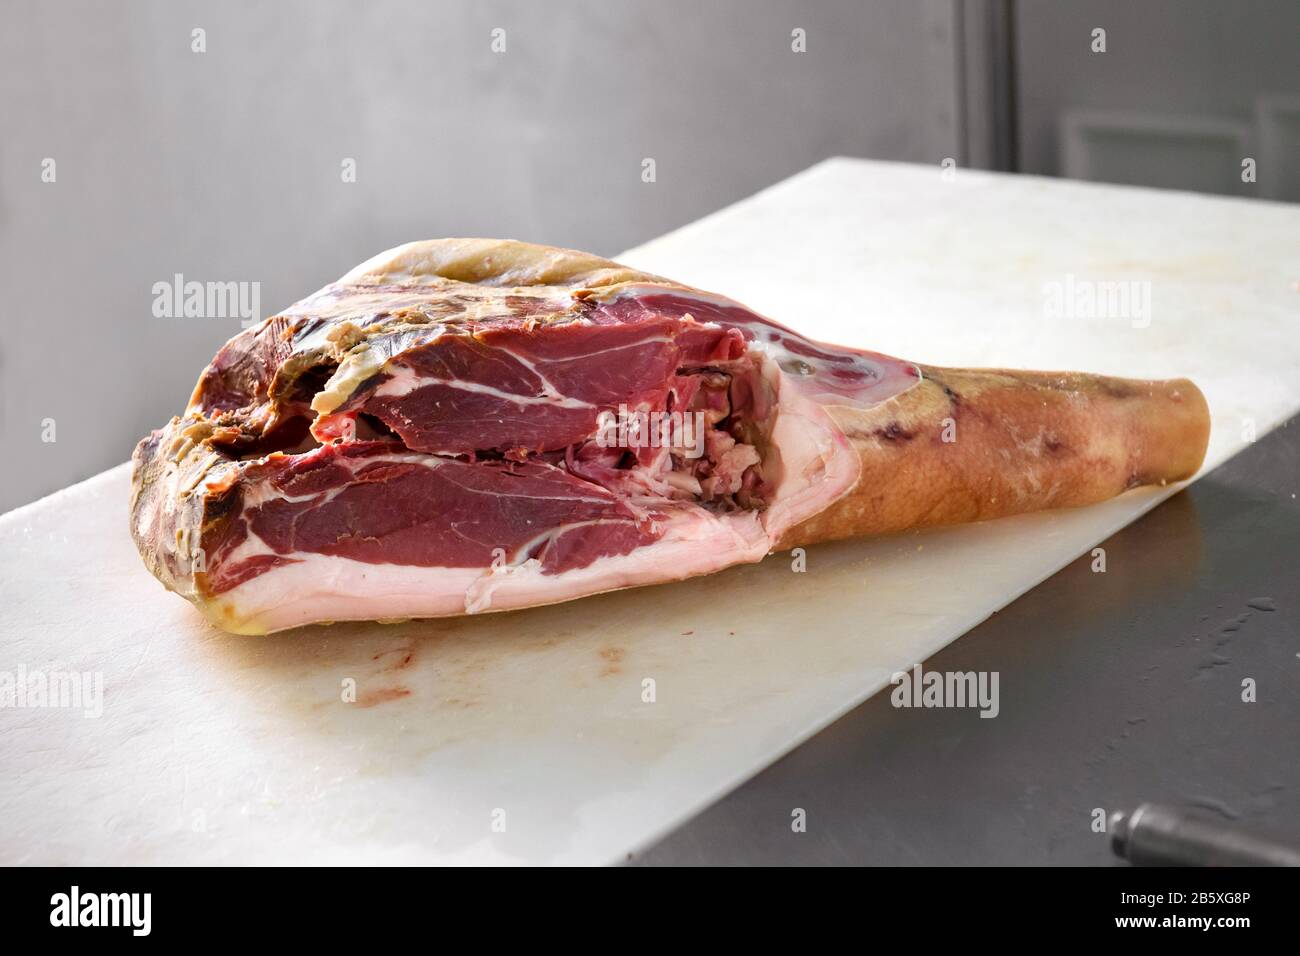 Piece of Prosciutto uncooked ham meat in a butcher shop, viewed in close-up on white cutting table Stock Photo